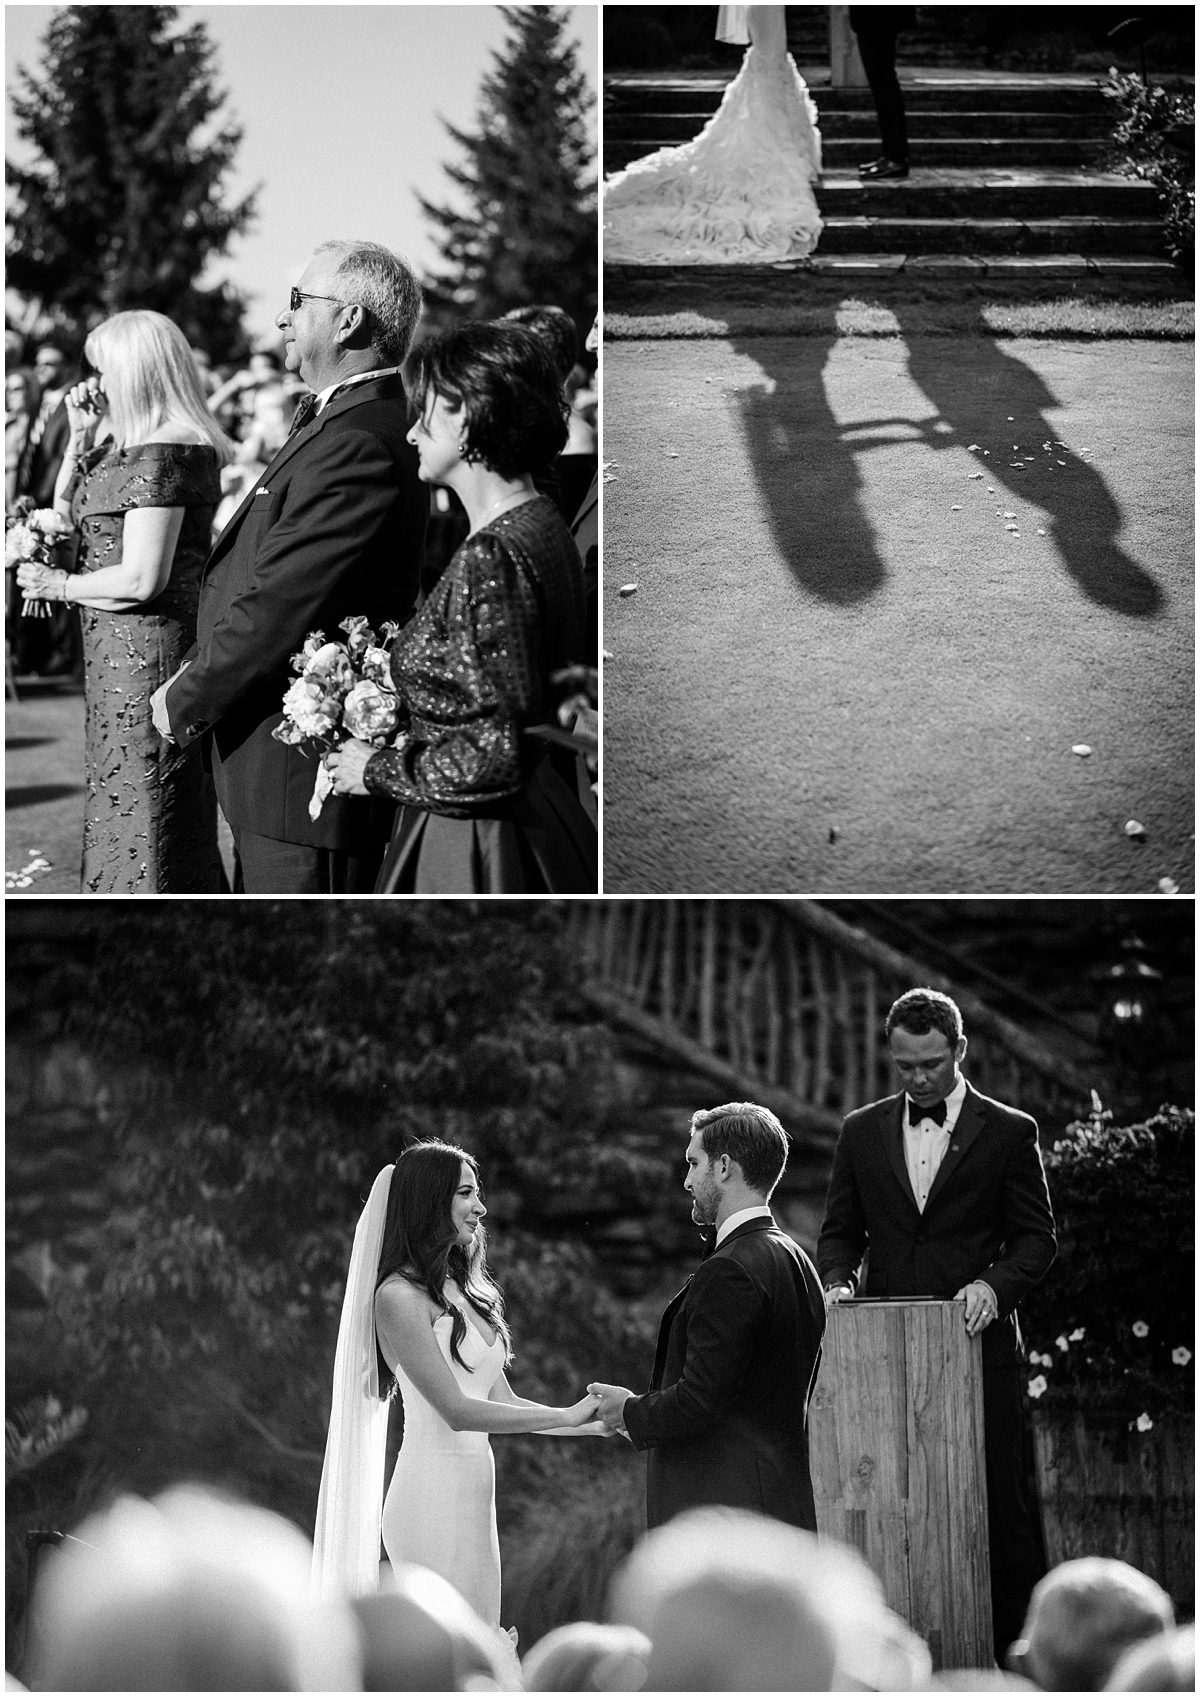 Creative photo of the couple's shadows holding hands during the ceremony at Mountaintop Golf and Lake Club wedding in Highlands NC